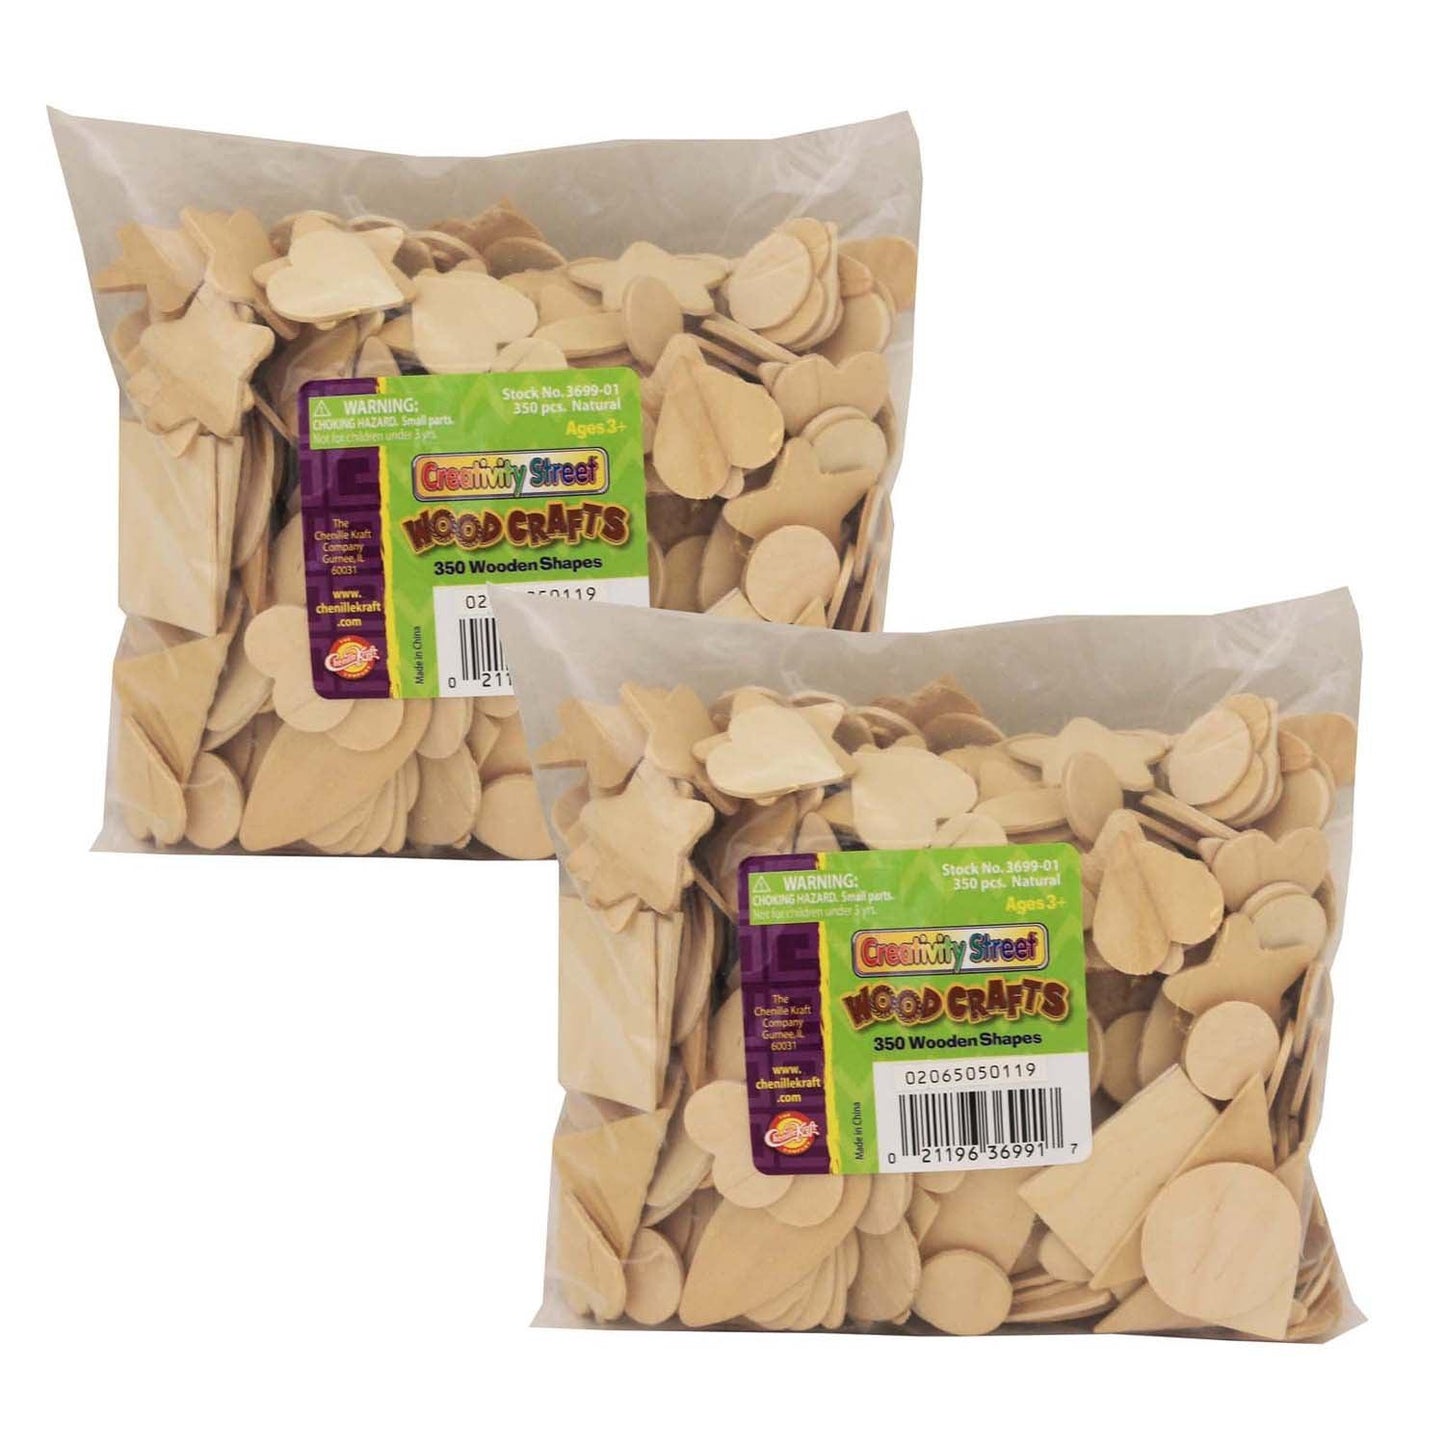 Wood Shapes, Natural Colored, Assorted Shapes, 1/2" to 2", 350 Per Pack, 2 Packs - Loomini